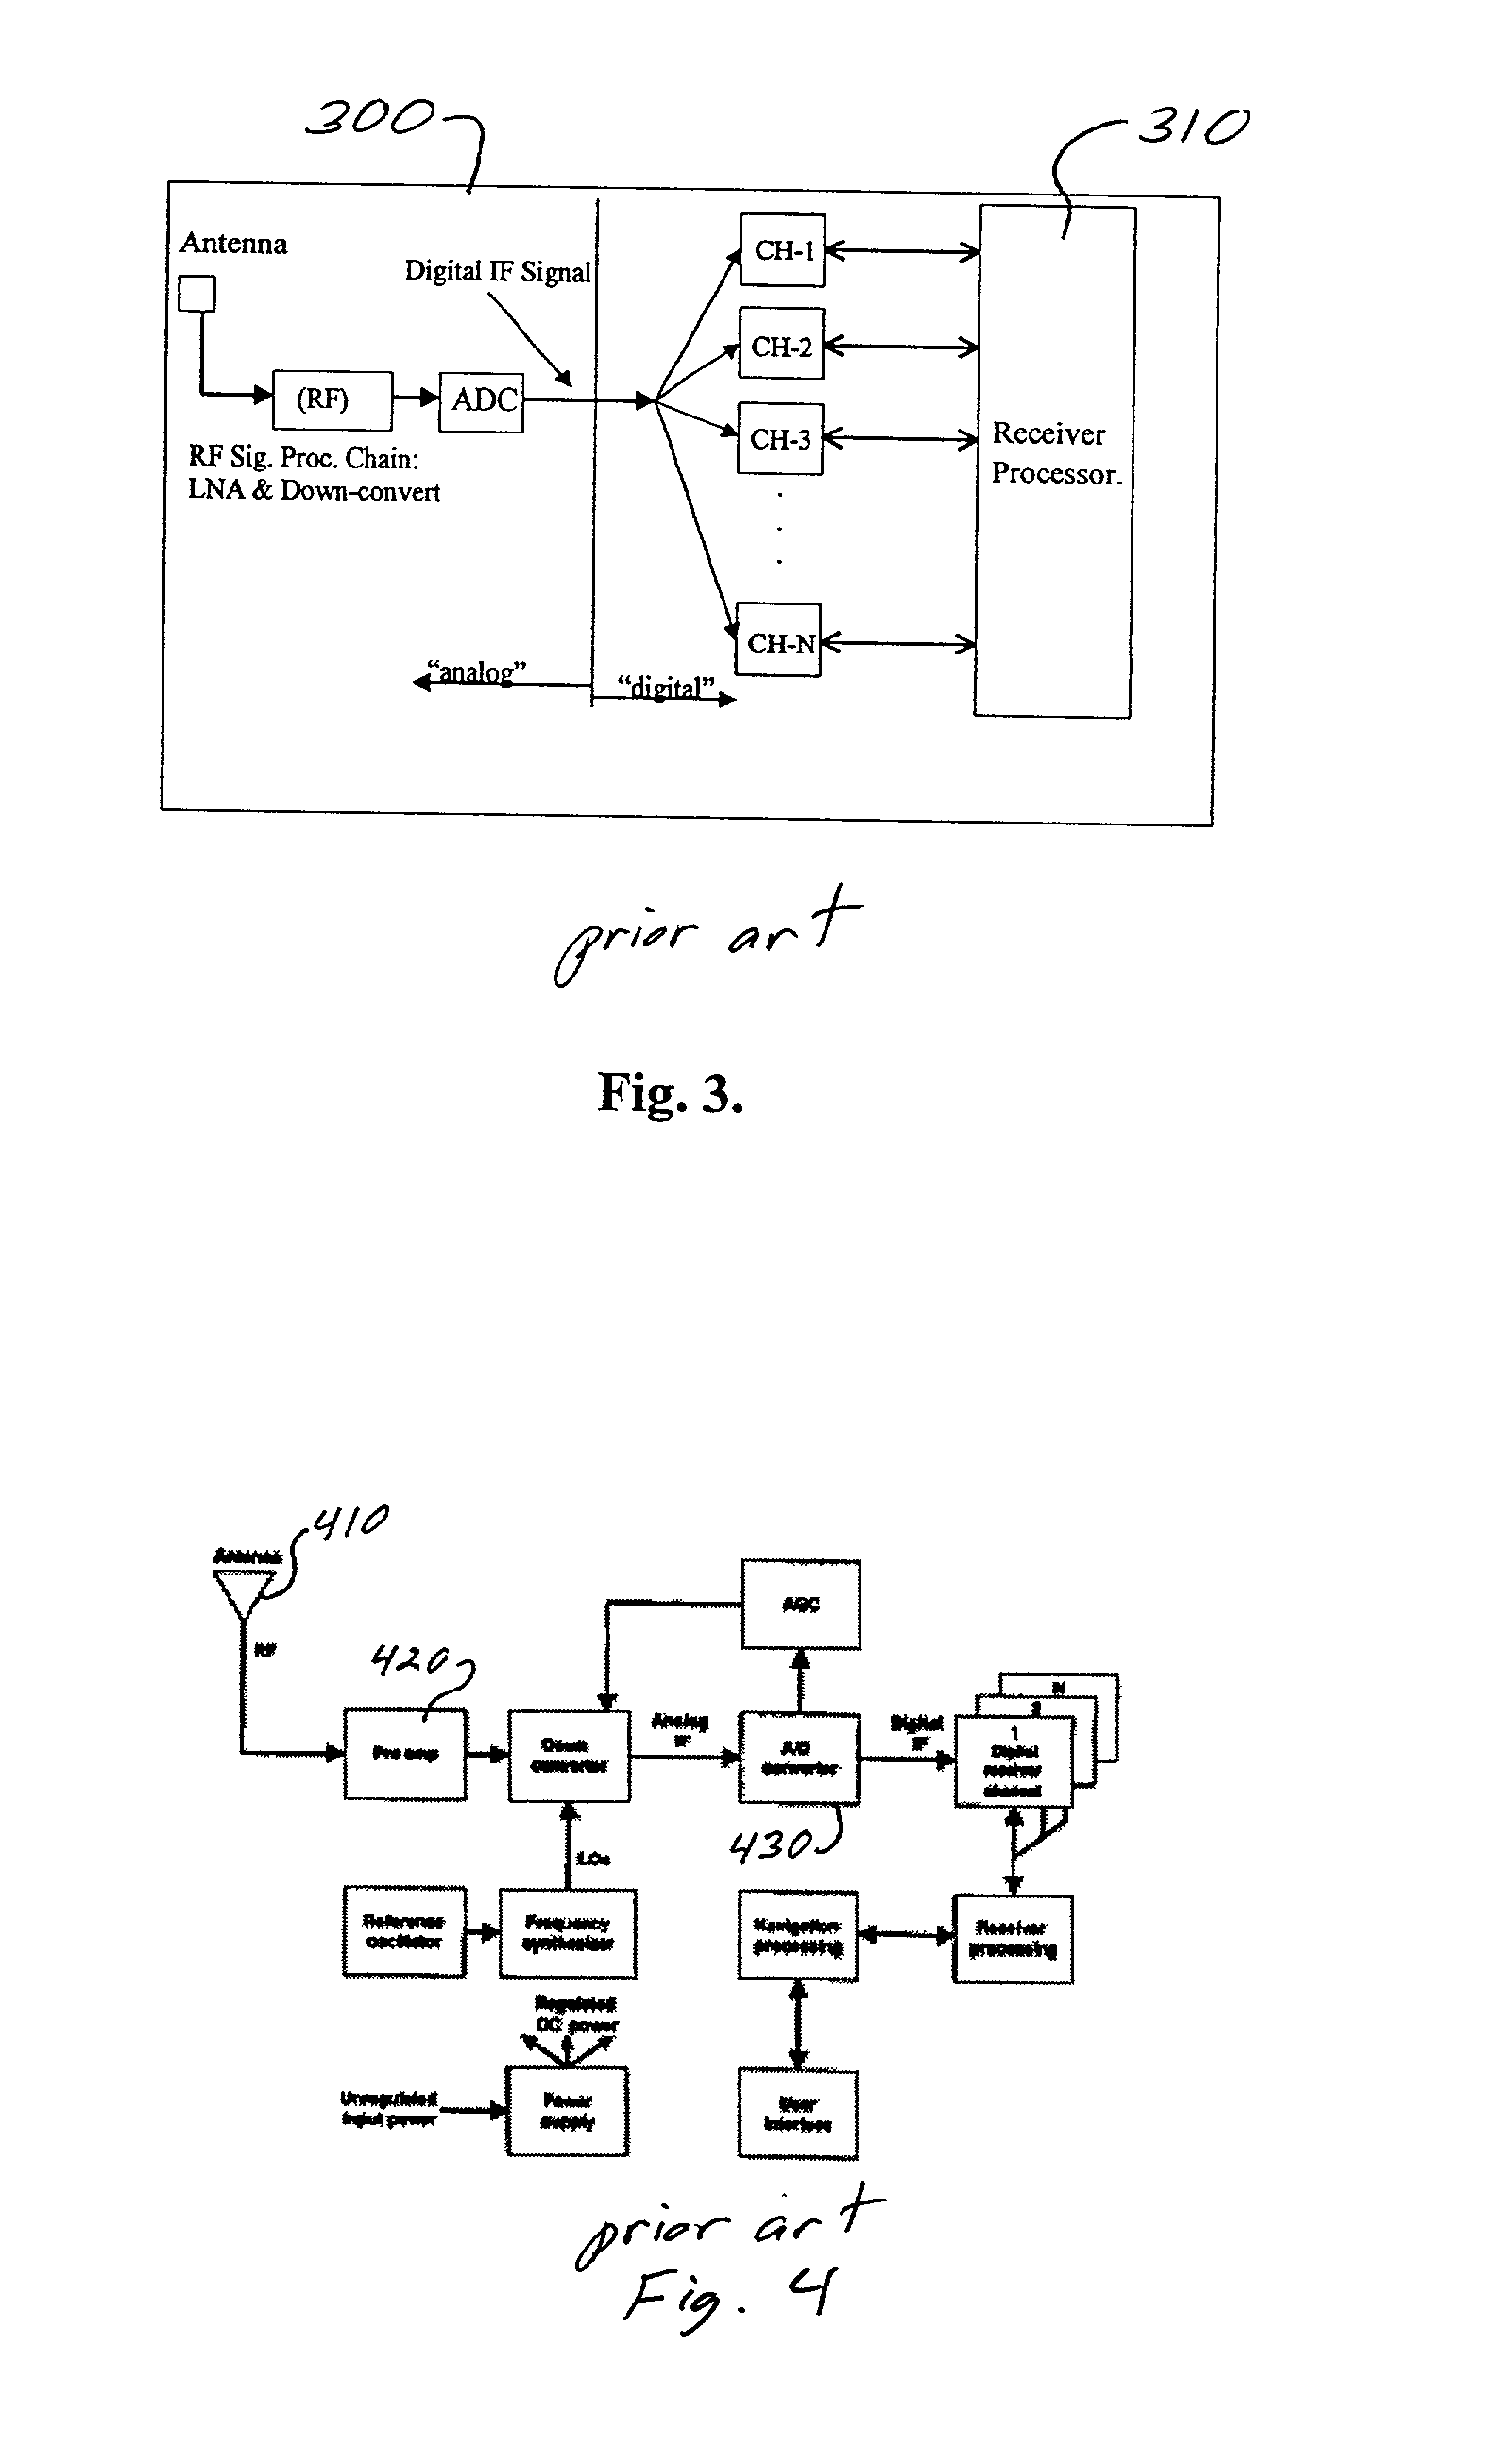 Global positioning system receiver capable of functioning in the presence of interference